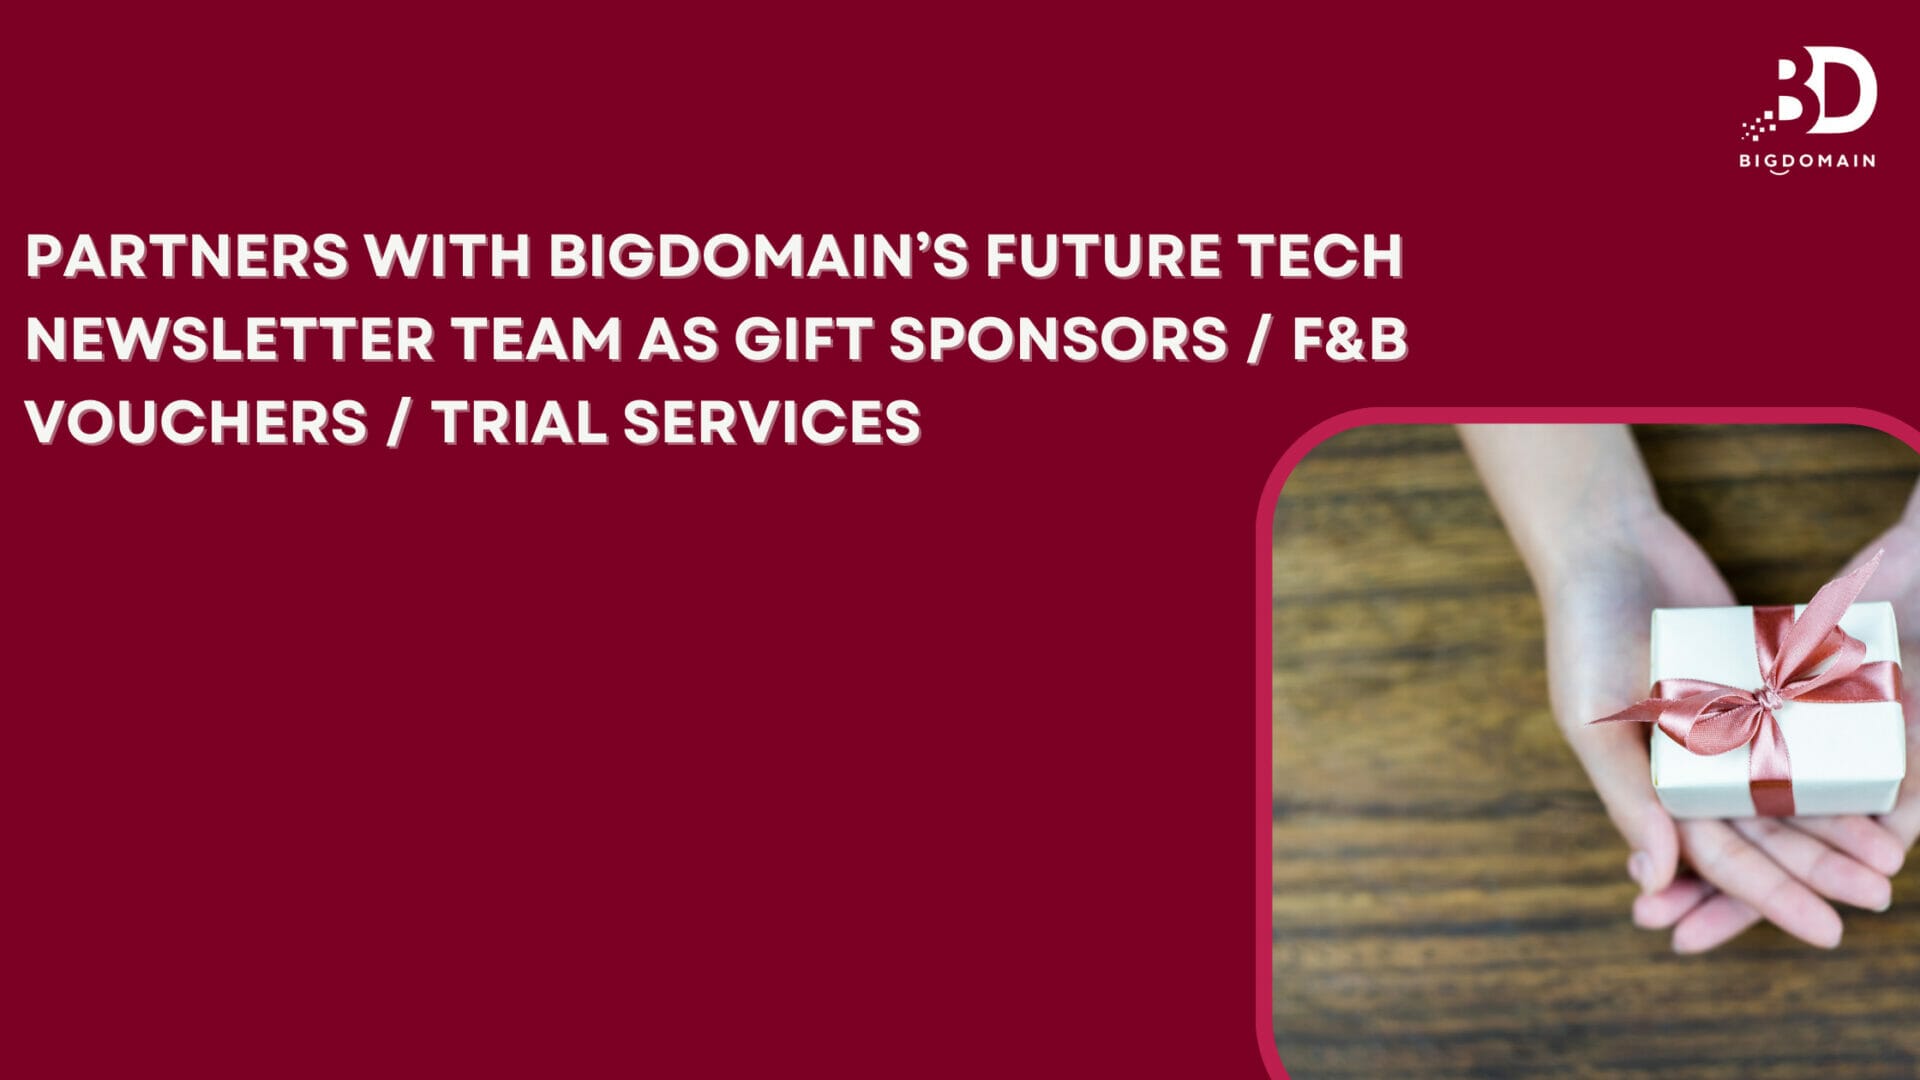 Partners with Bigdomain’s Future Tech Newsletter team as Gift Sponsors / F&B Vouchers / Trial Services